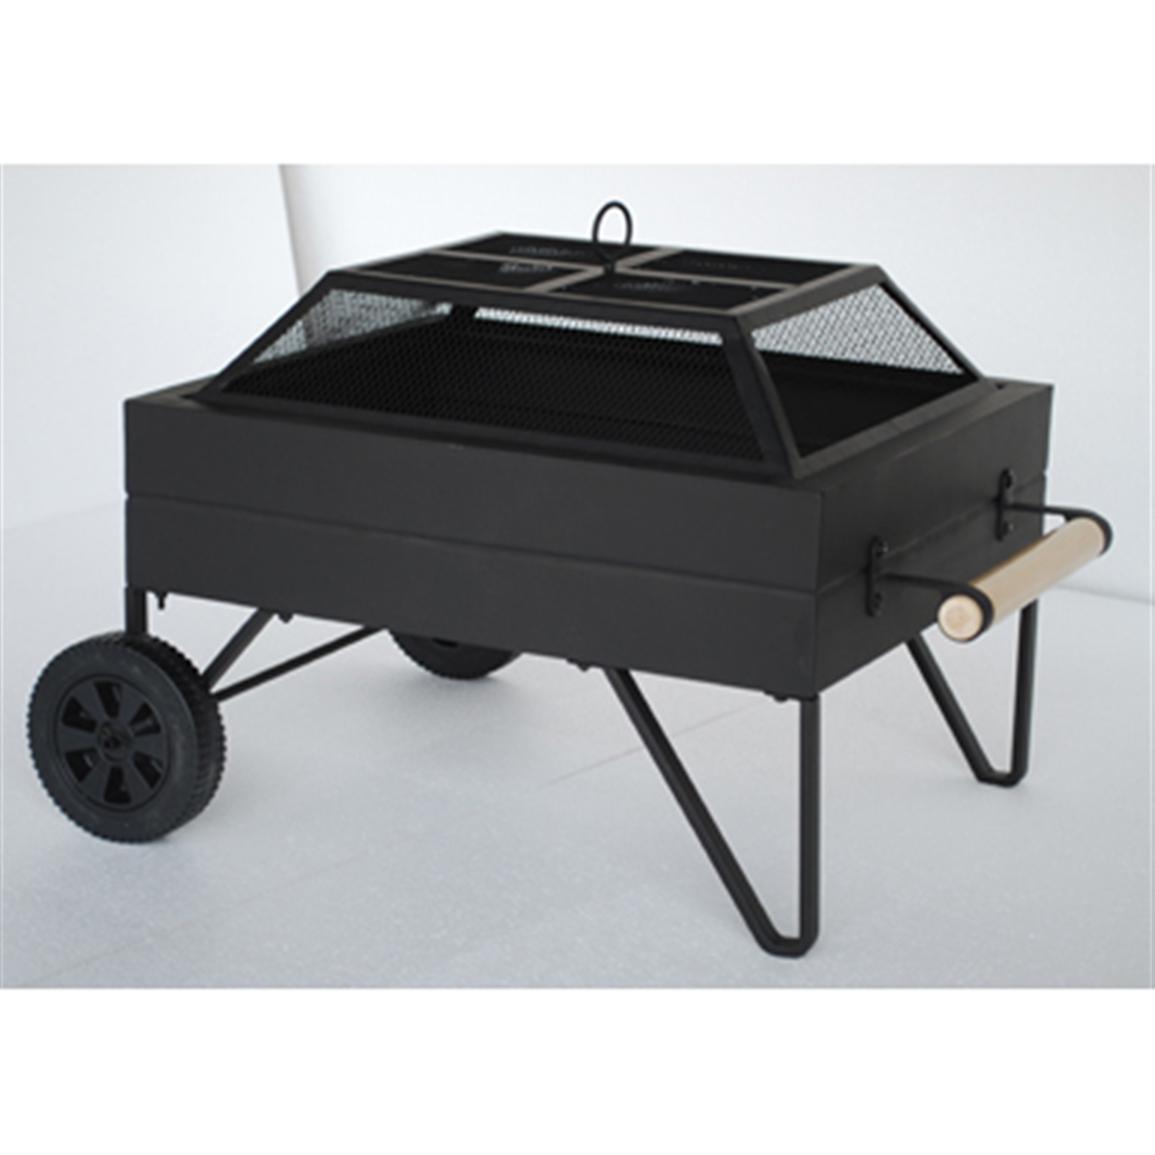 Steel Fire Pit On Wheels 190615 Fire Pits Patio Heaters At Sportsman S Guide